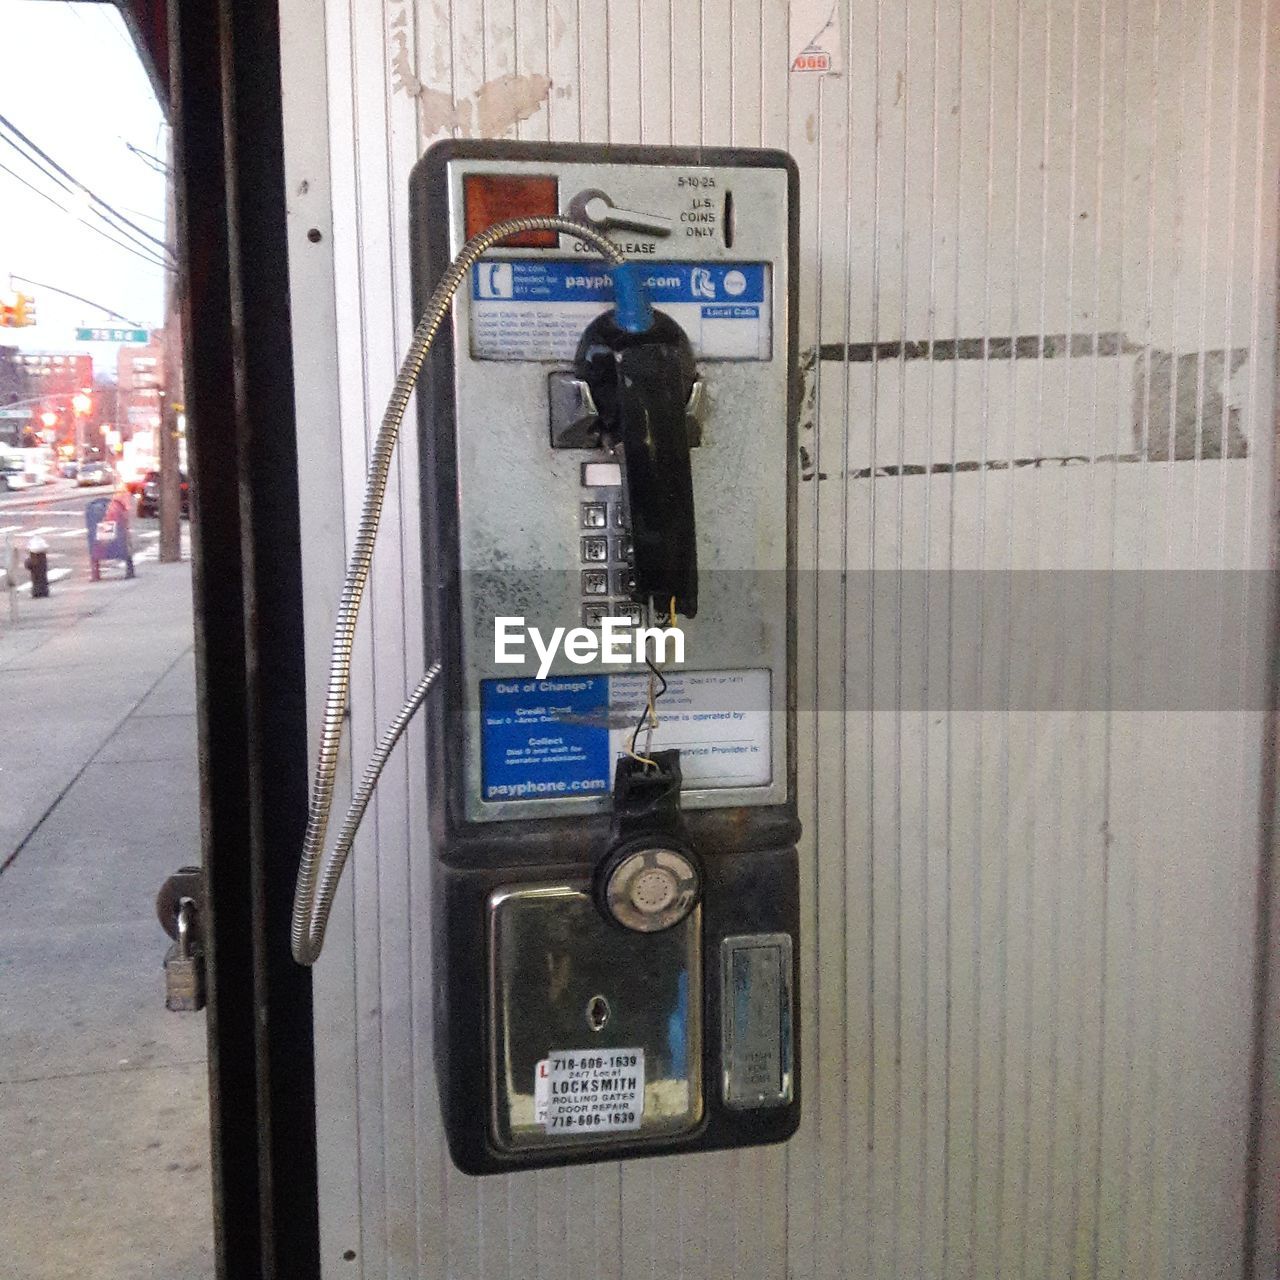 TEXT ON TELEPHONE BOOTH